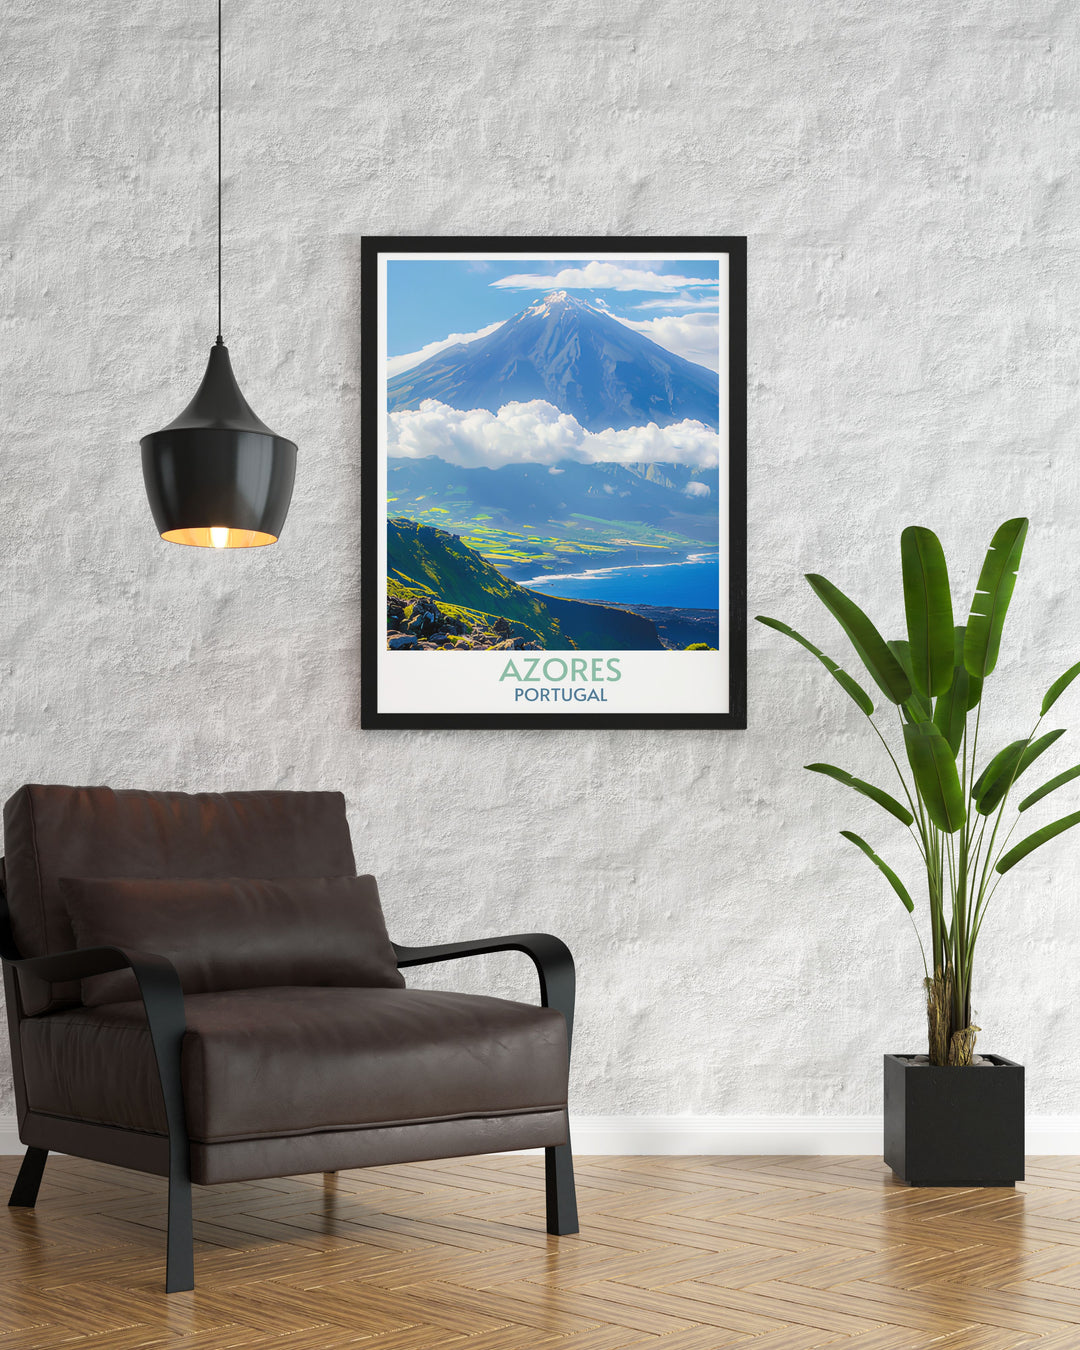 Azores poster featuring the iconic silhouette of Mount Pico against Pico Islands lush scenery, perfect for adding drama to your decor.